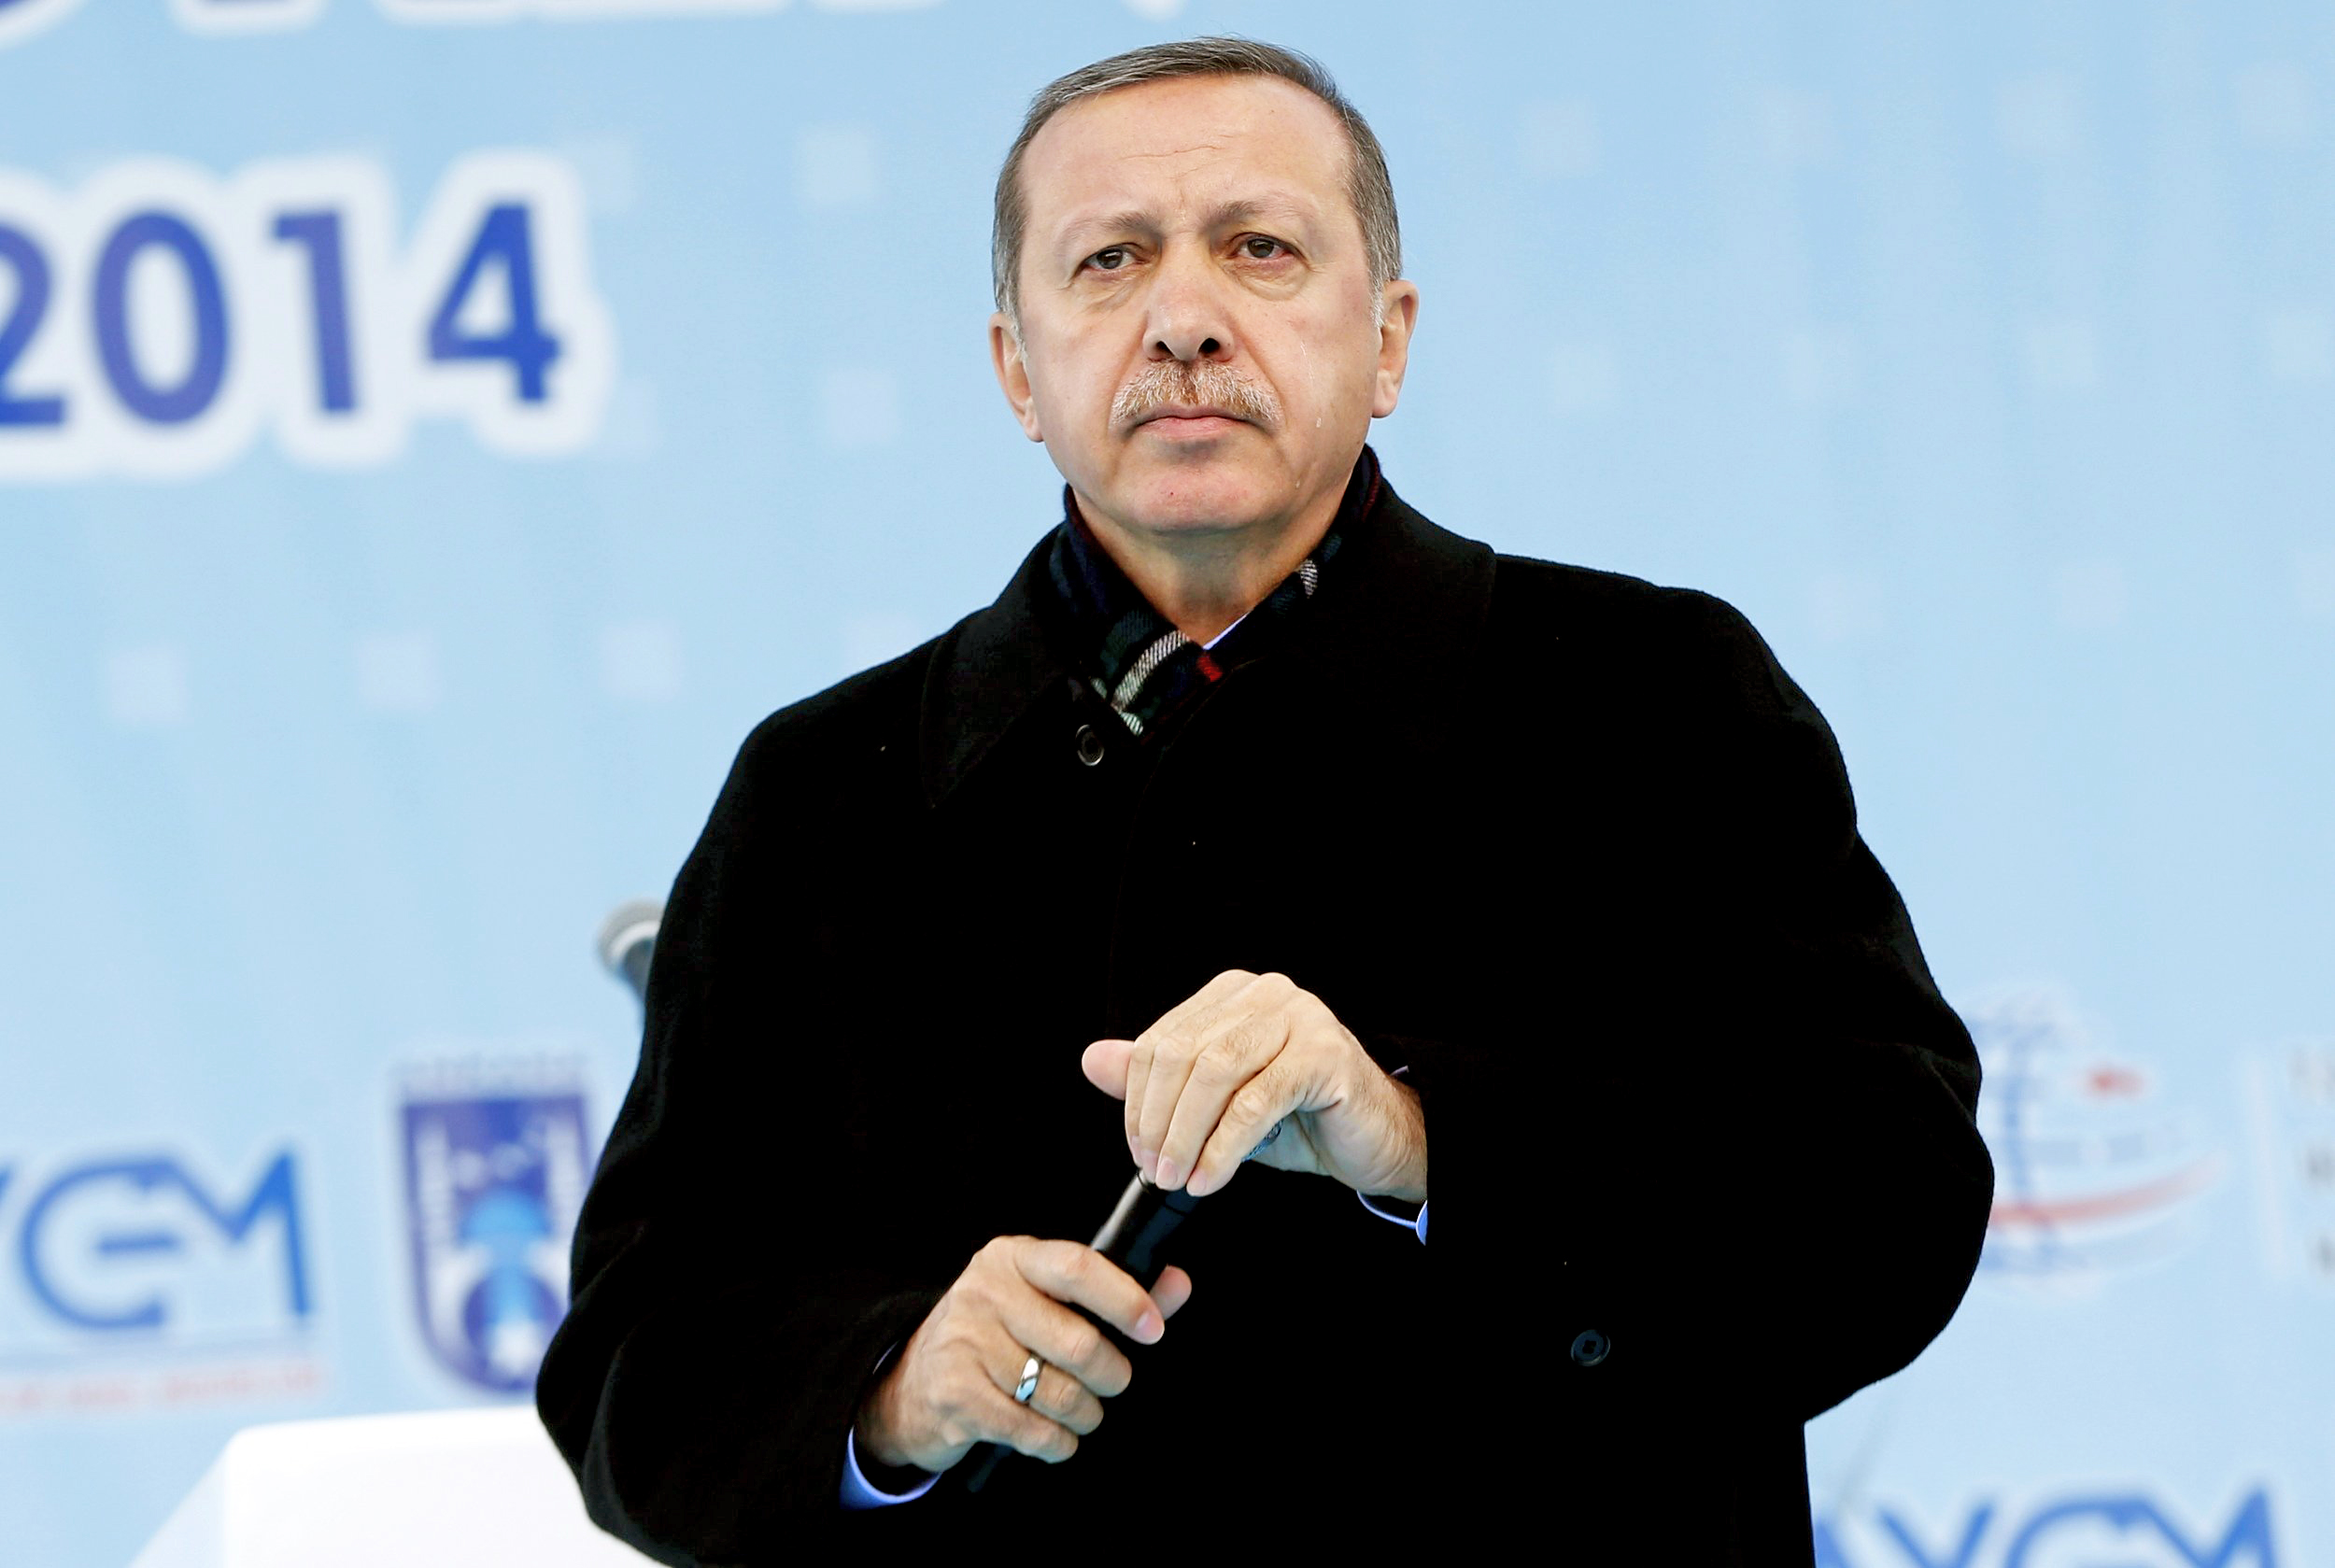 Turkey's Prime Minister Tayyip Erdogan addresses the crowd during an opening ceremony of a new metro line in Ankara on March 13, 2014.